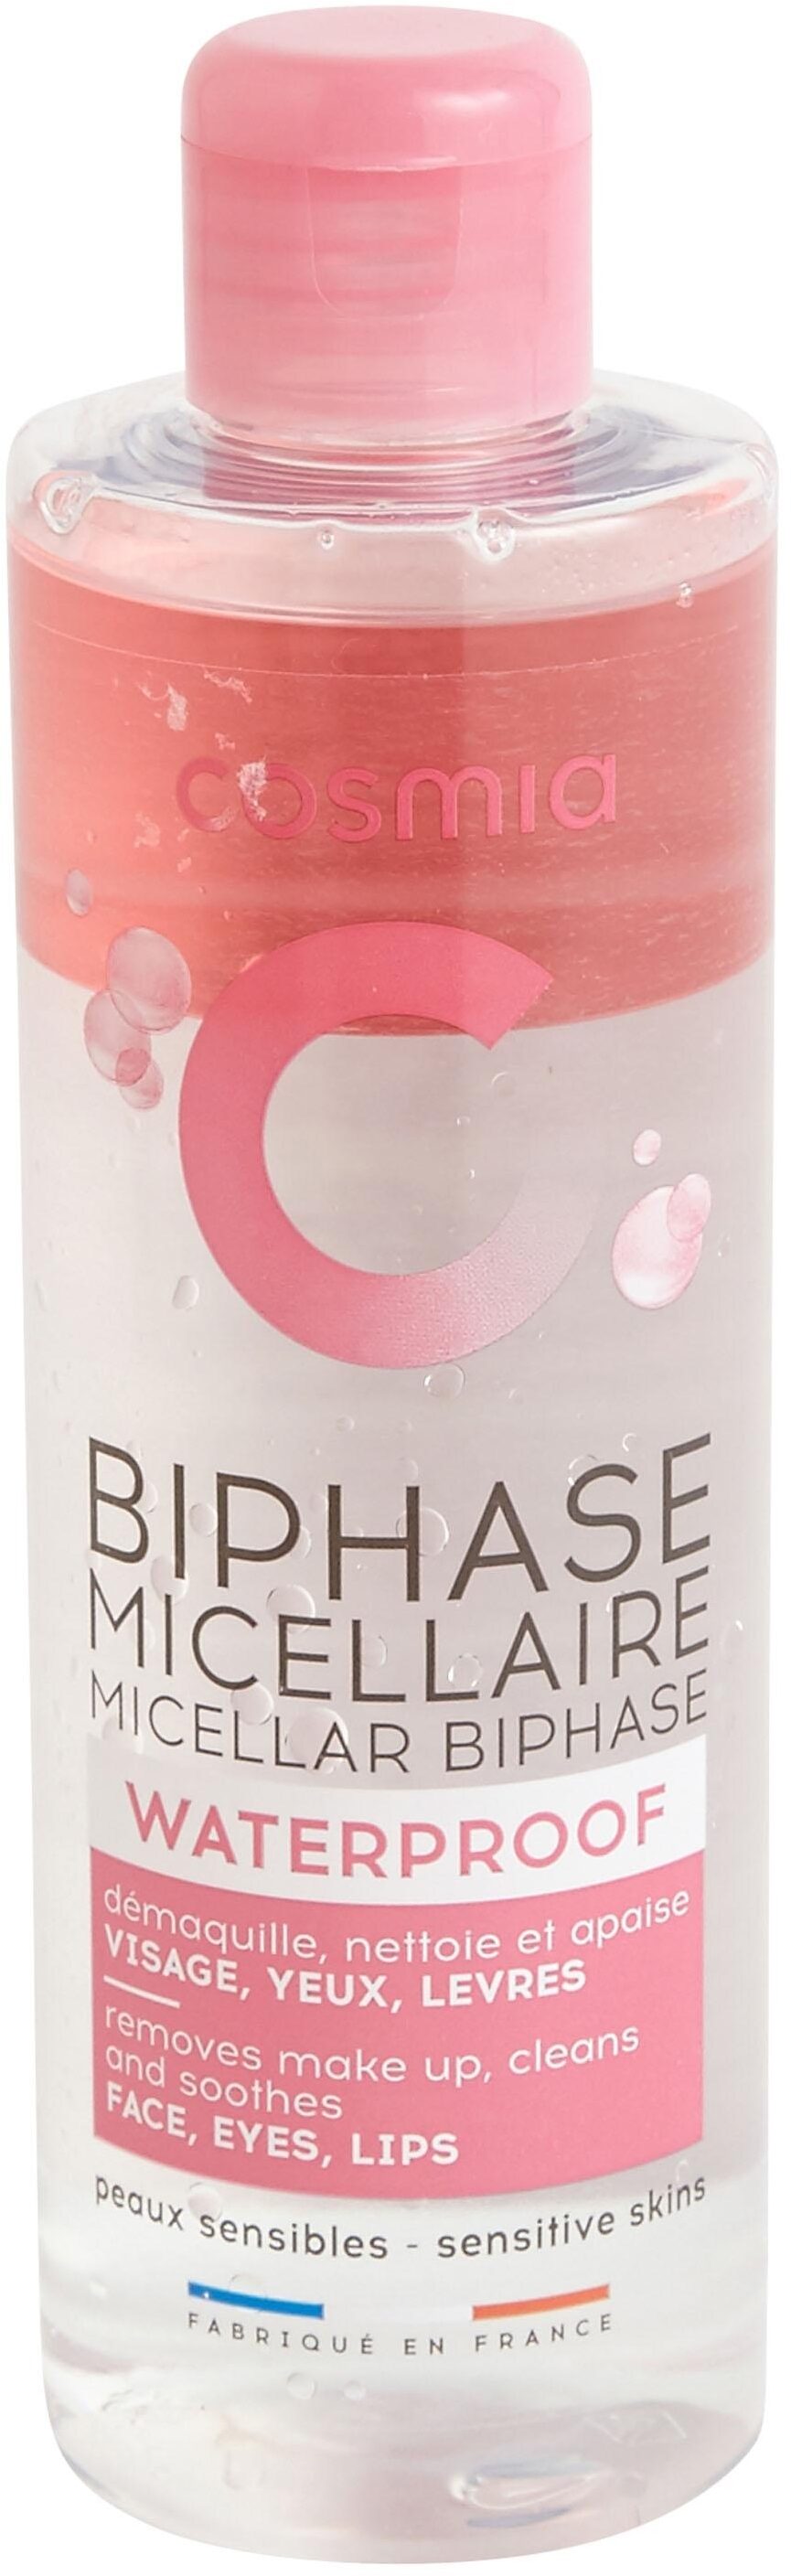 Biphase micellaire waterproof - Produkto - fr